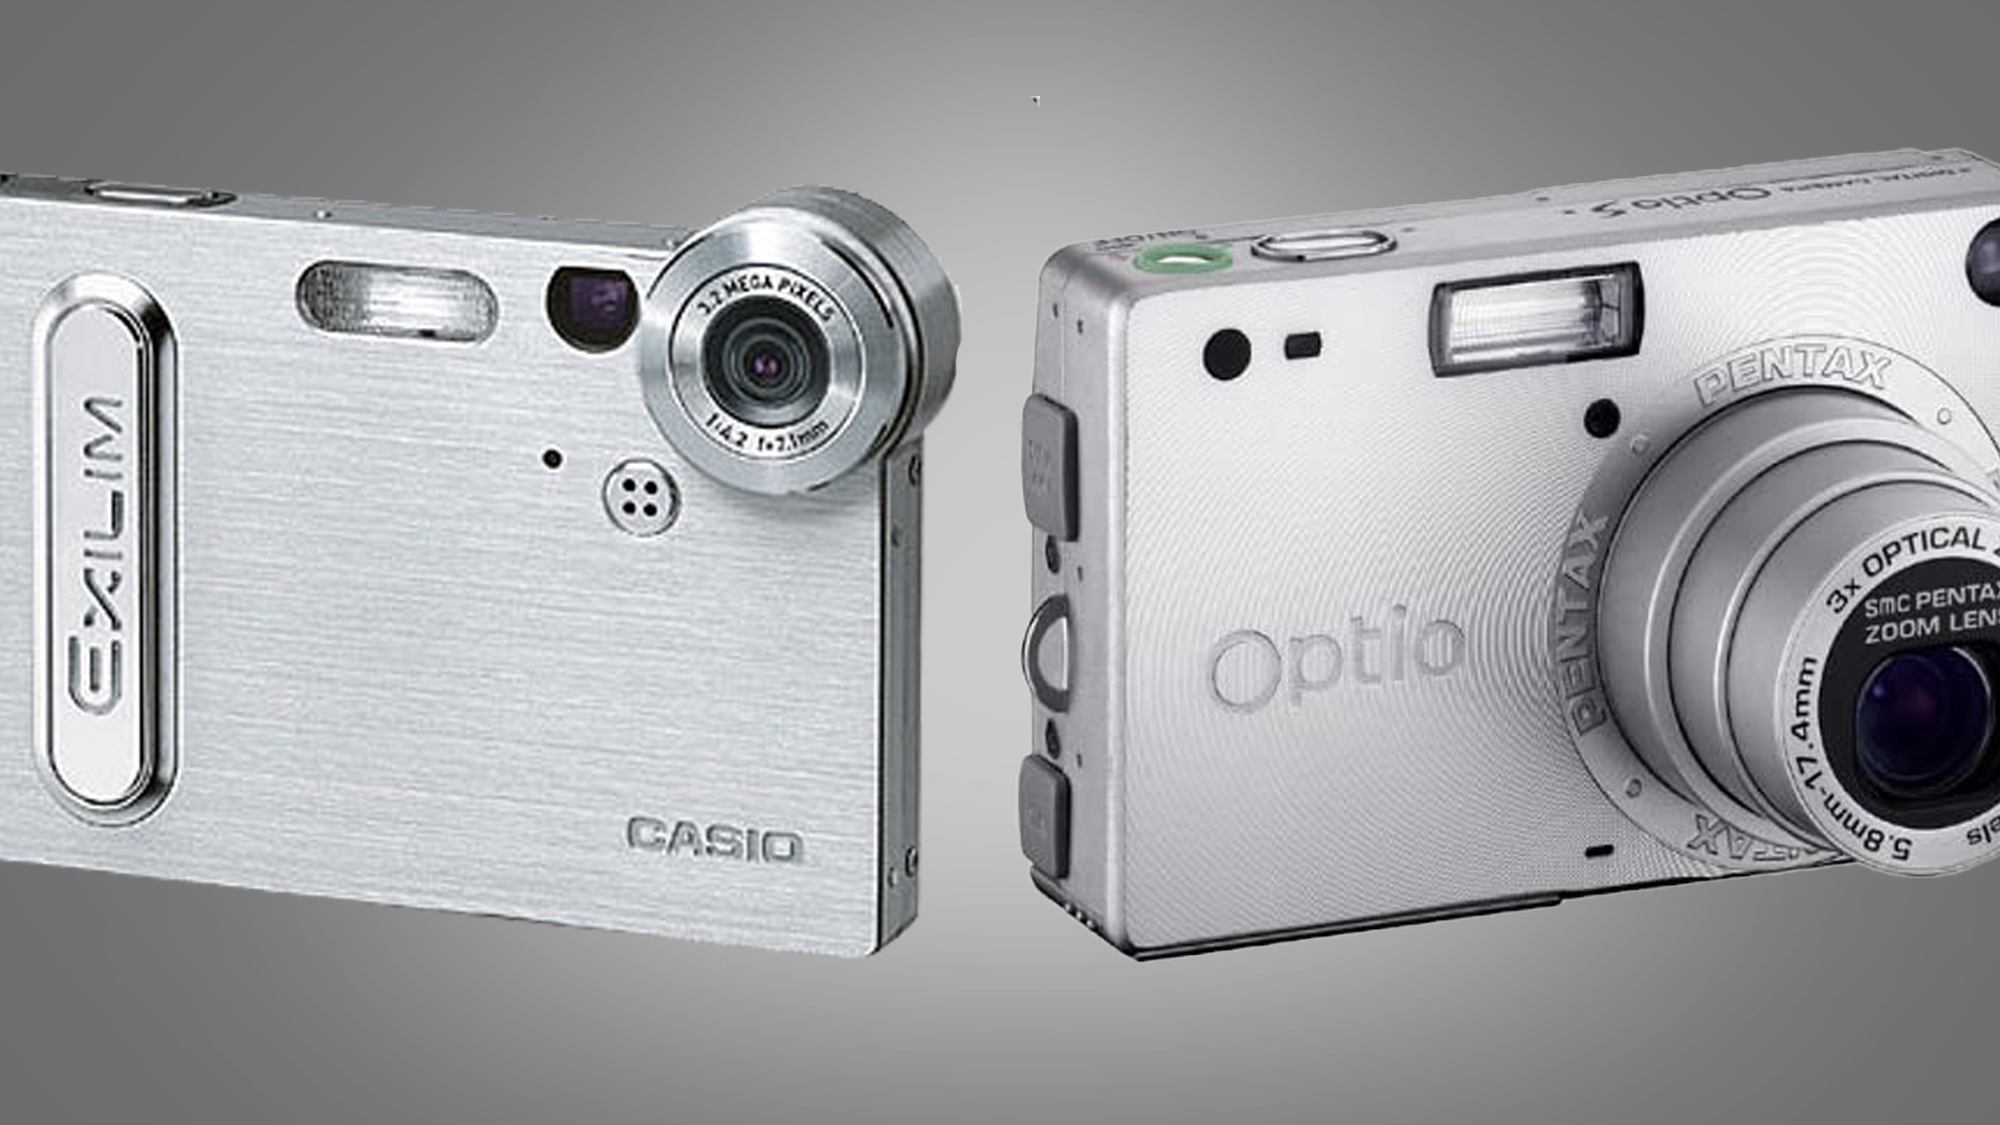 A Casio and Pentax compact camera side by side on a gray background